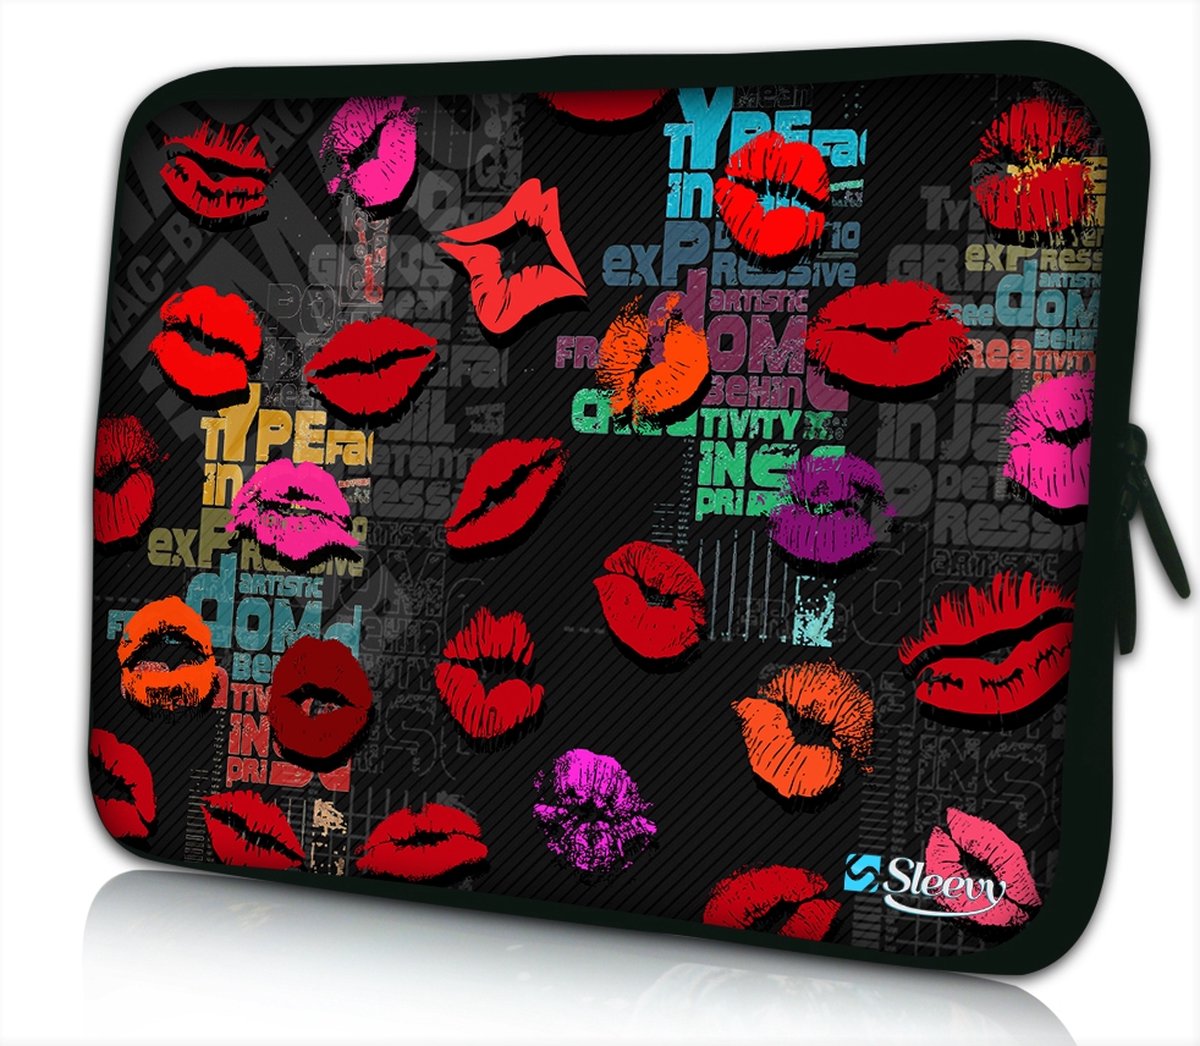 Sleevy 14 laptophoes kusjes - laptop sleeve - Sleevy collectie 300+ designs